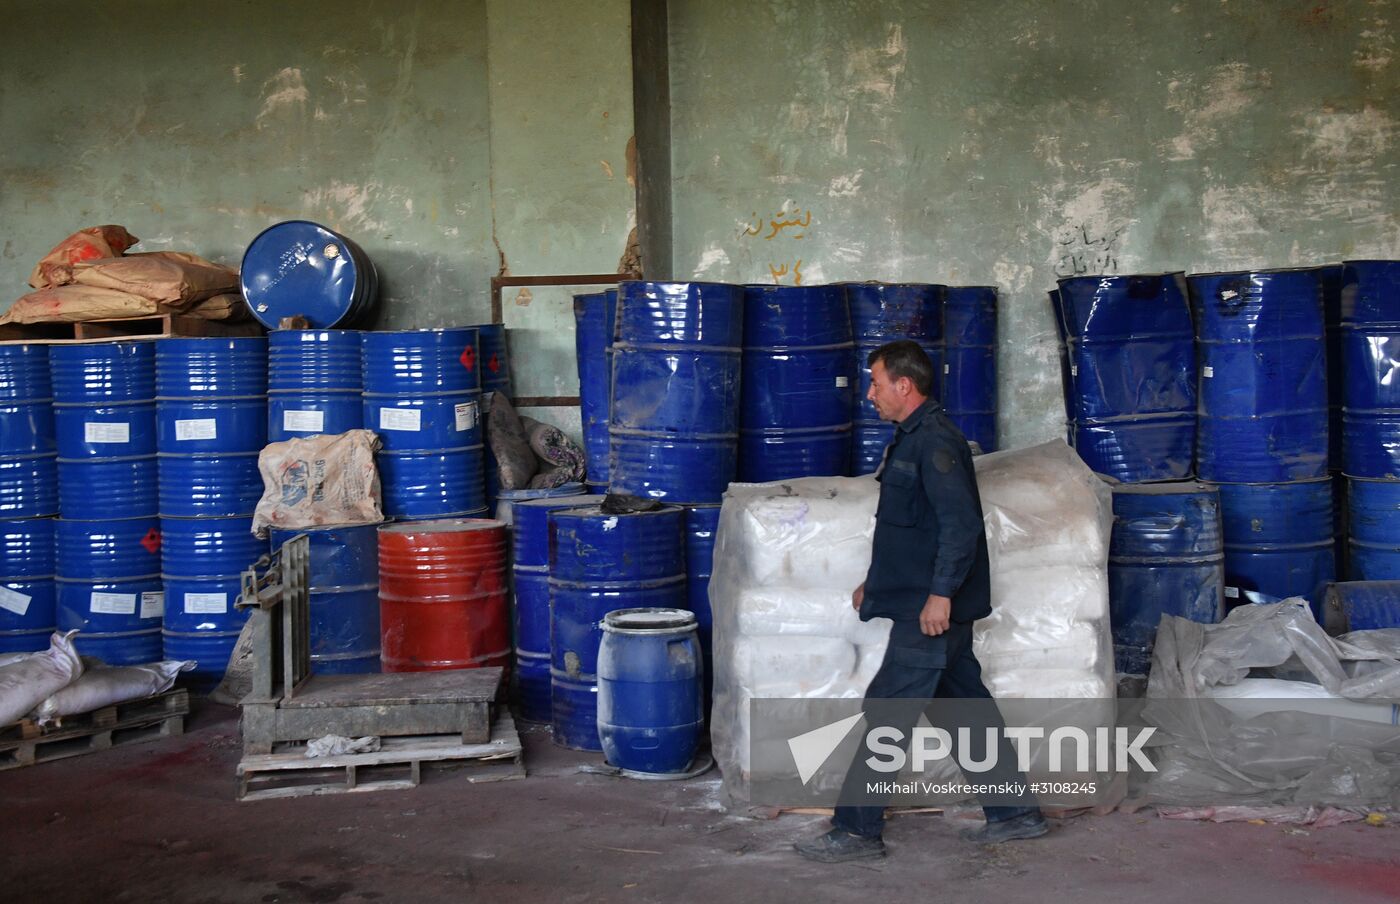 Paint factory in Damascus suburb